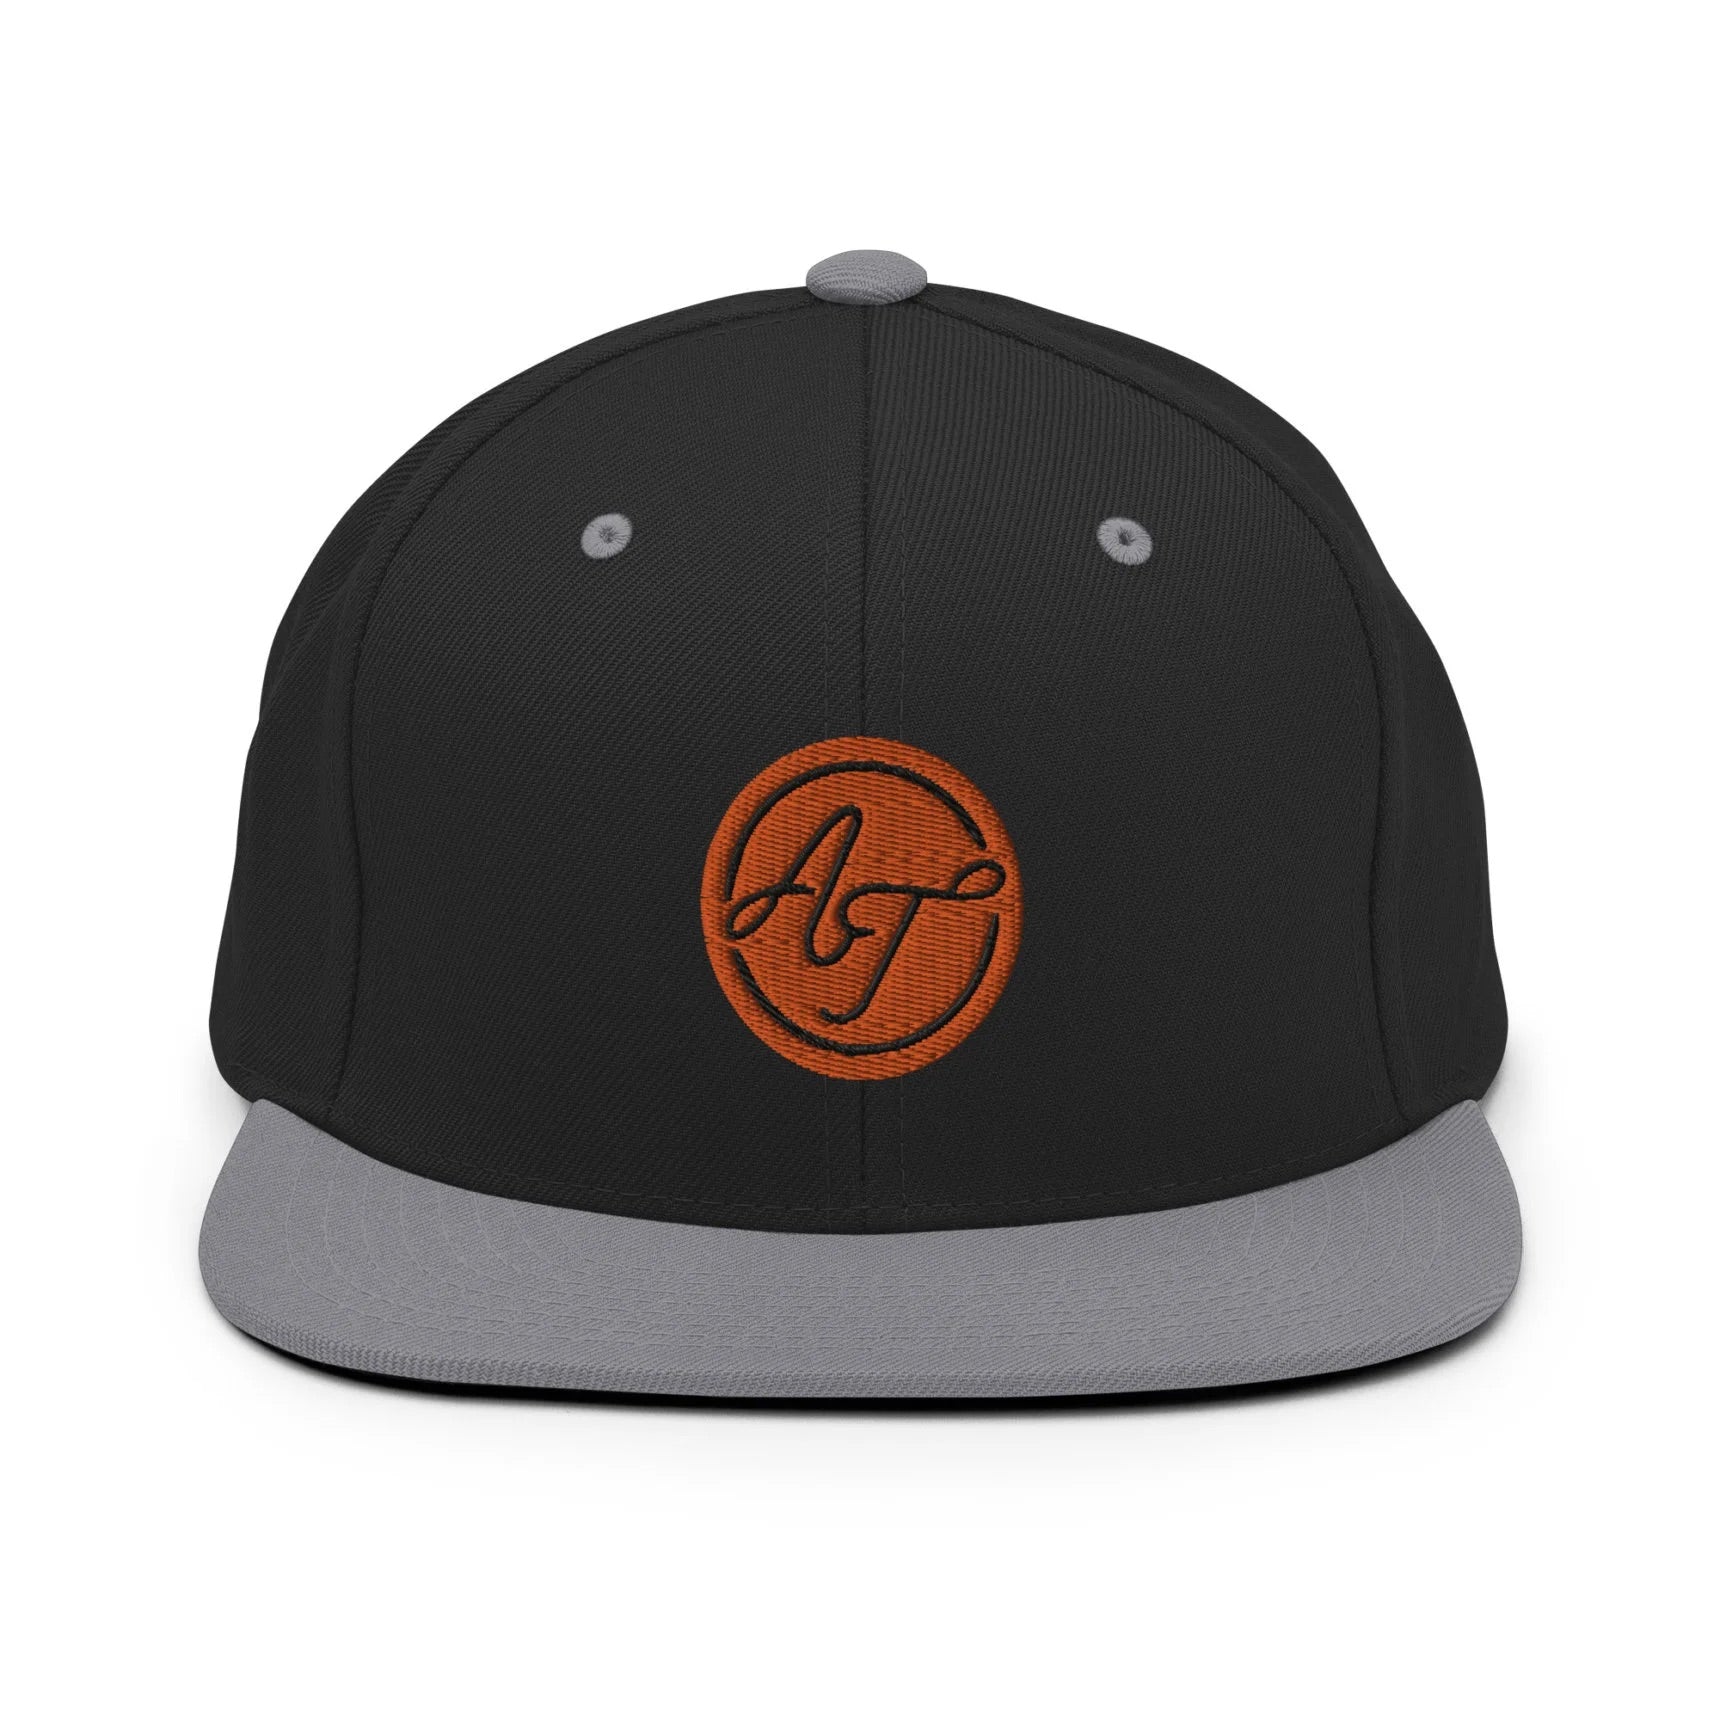 Thuuuuney ShowZone snapback hat in black with grey brim and accents